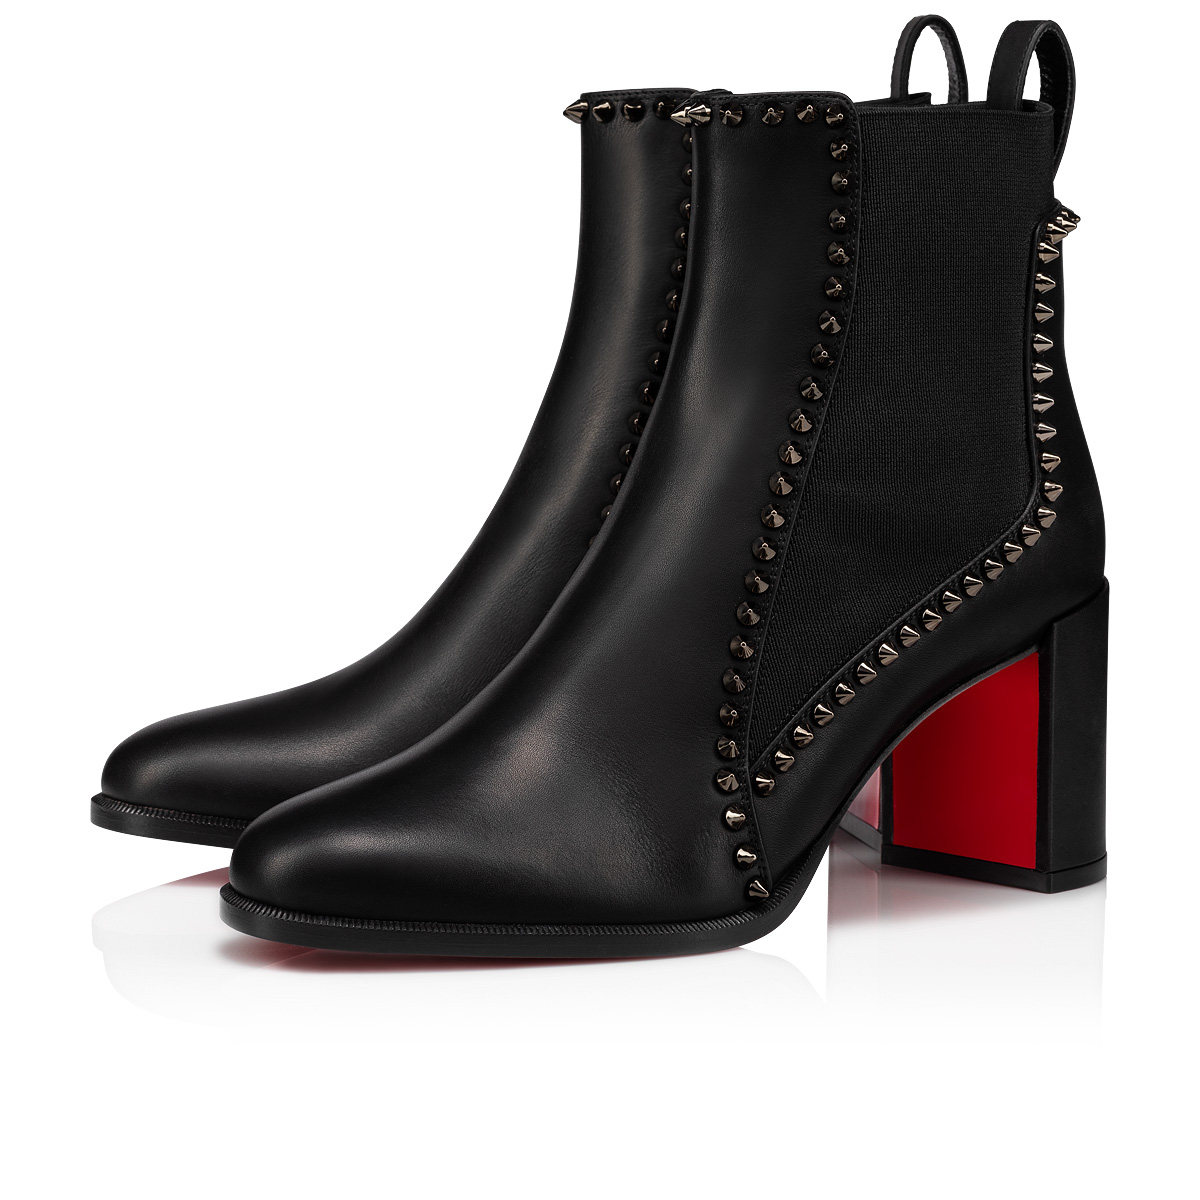 Line Spikes - 70 mm Low boots - Calf leather and spikes - Black - Christian Louboutin